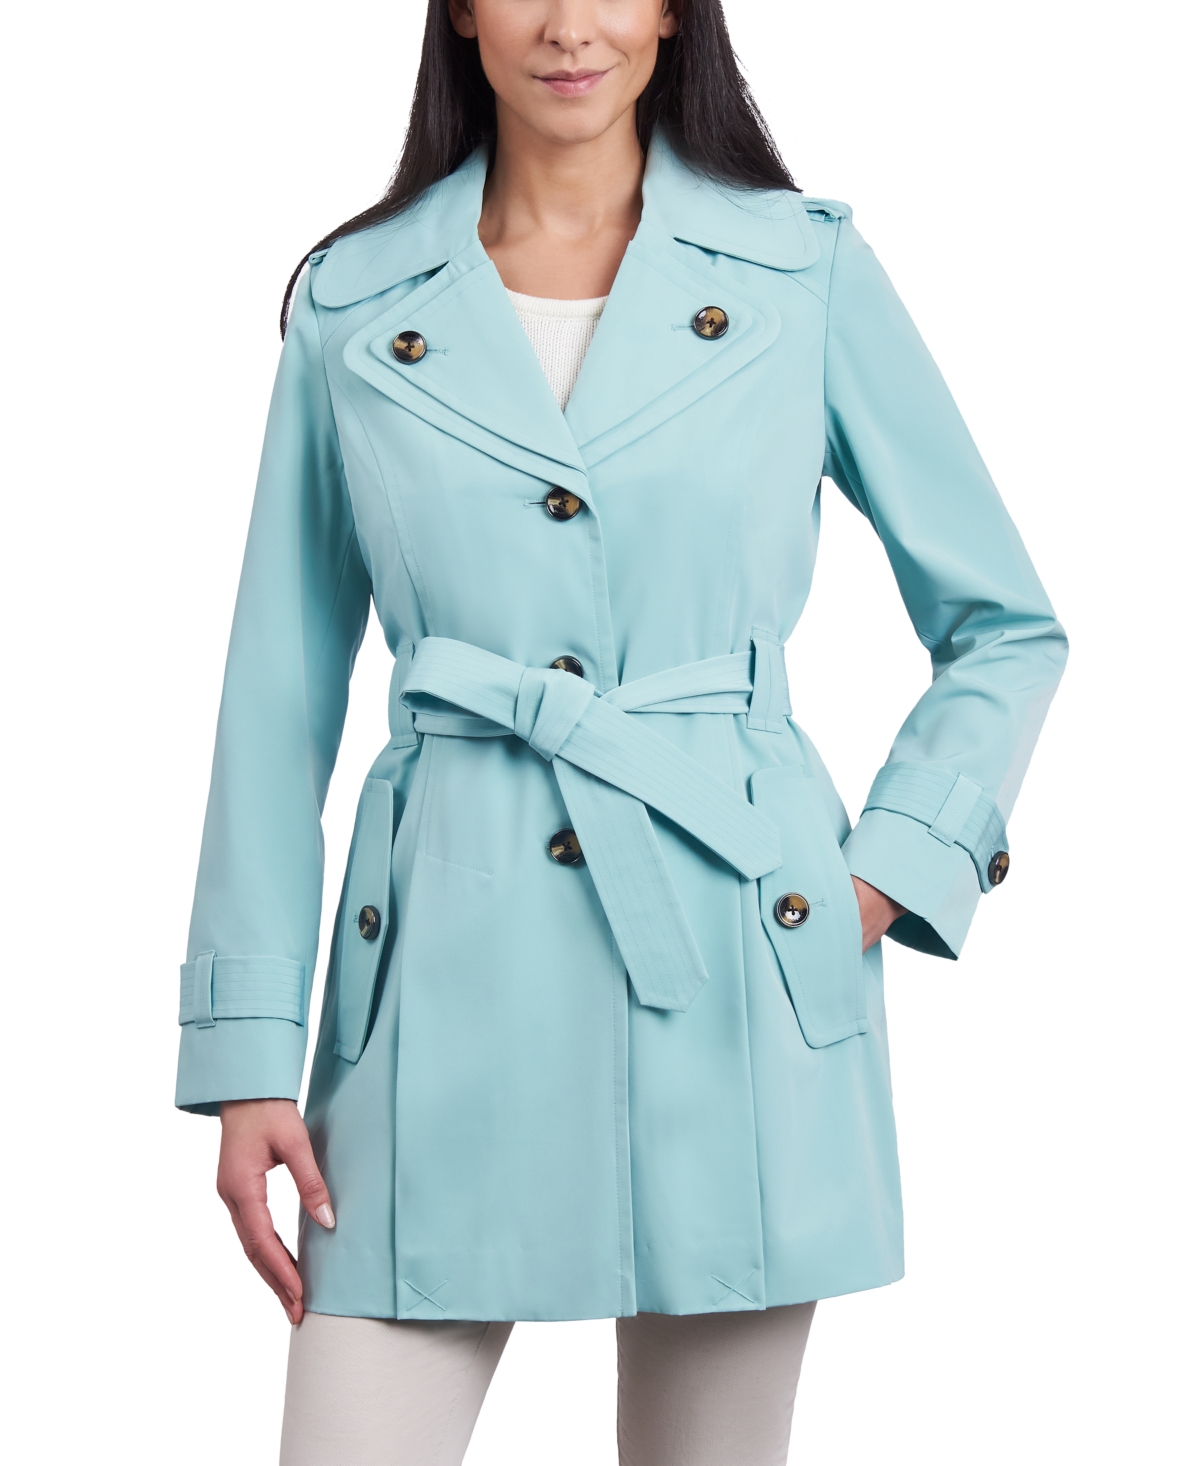 Women's Petite Single-Breasted Belted Trench Coat - Green Tea